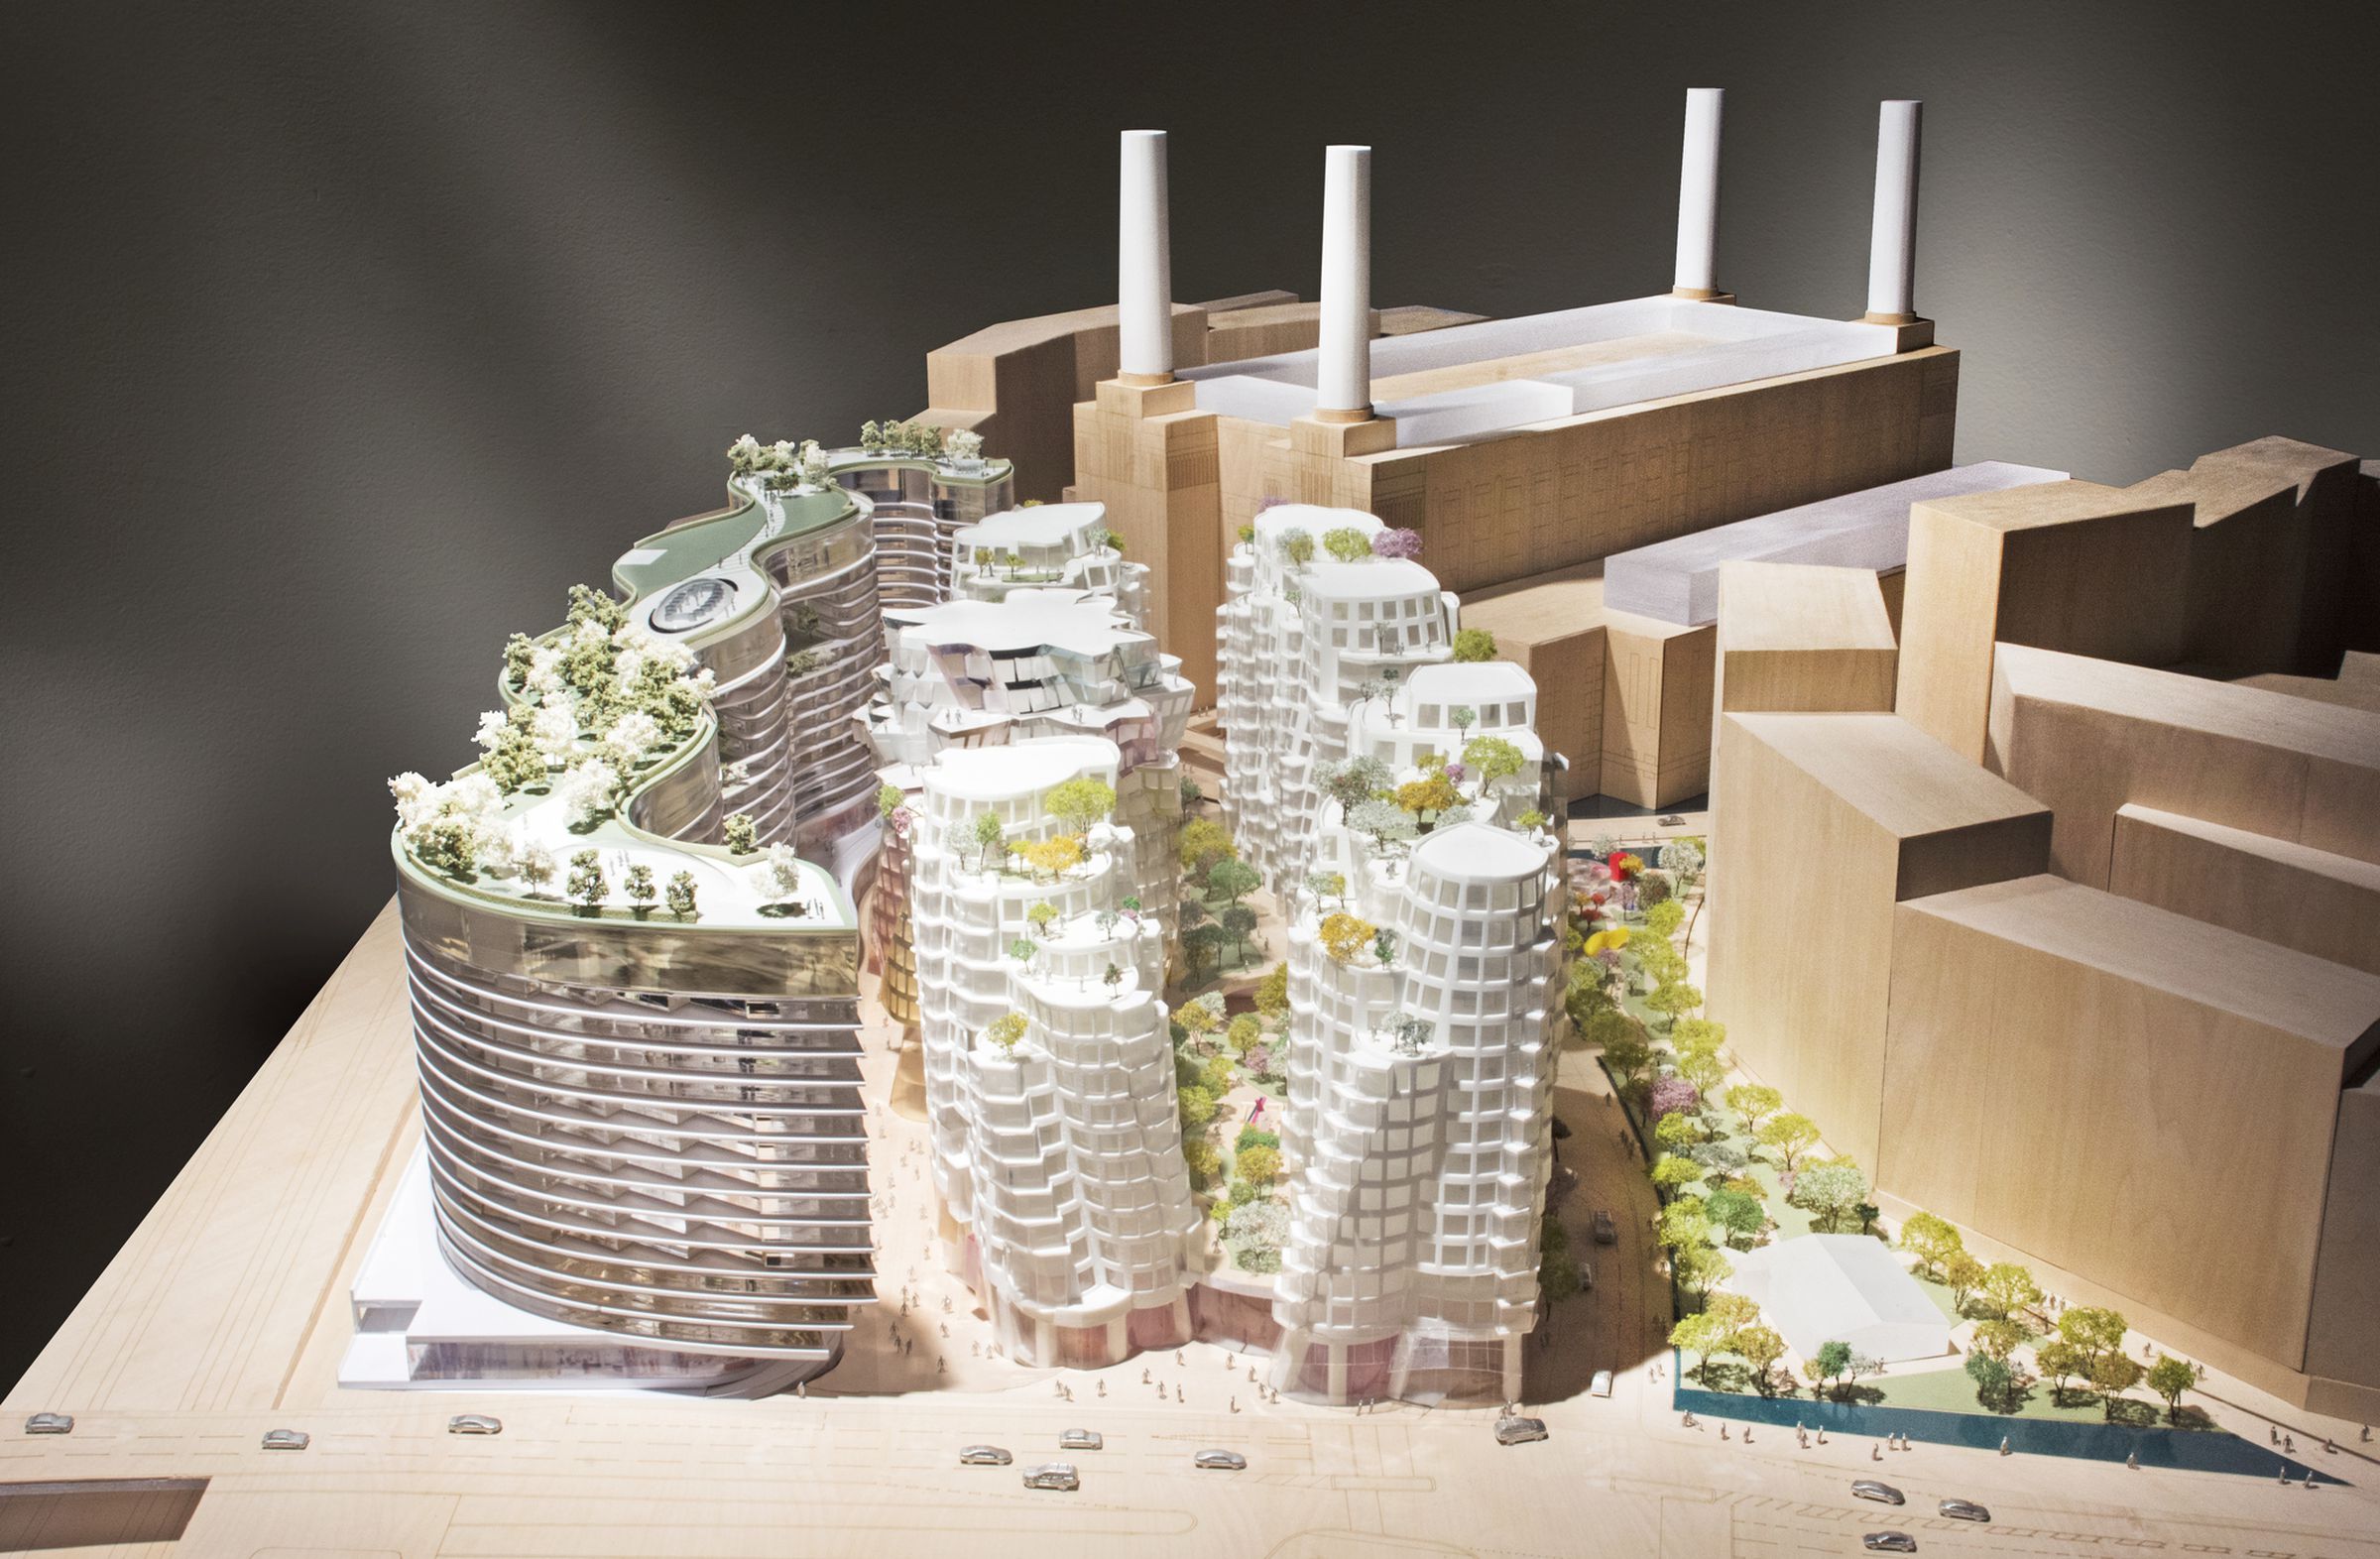 Battersea Power Station designs by Frank Gehry and Norman Foster